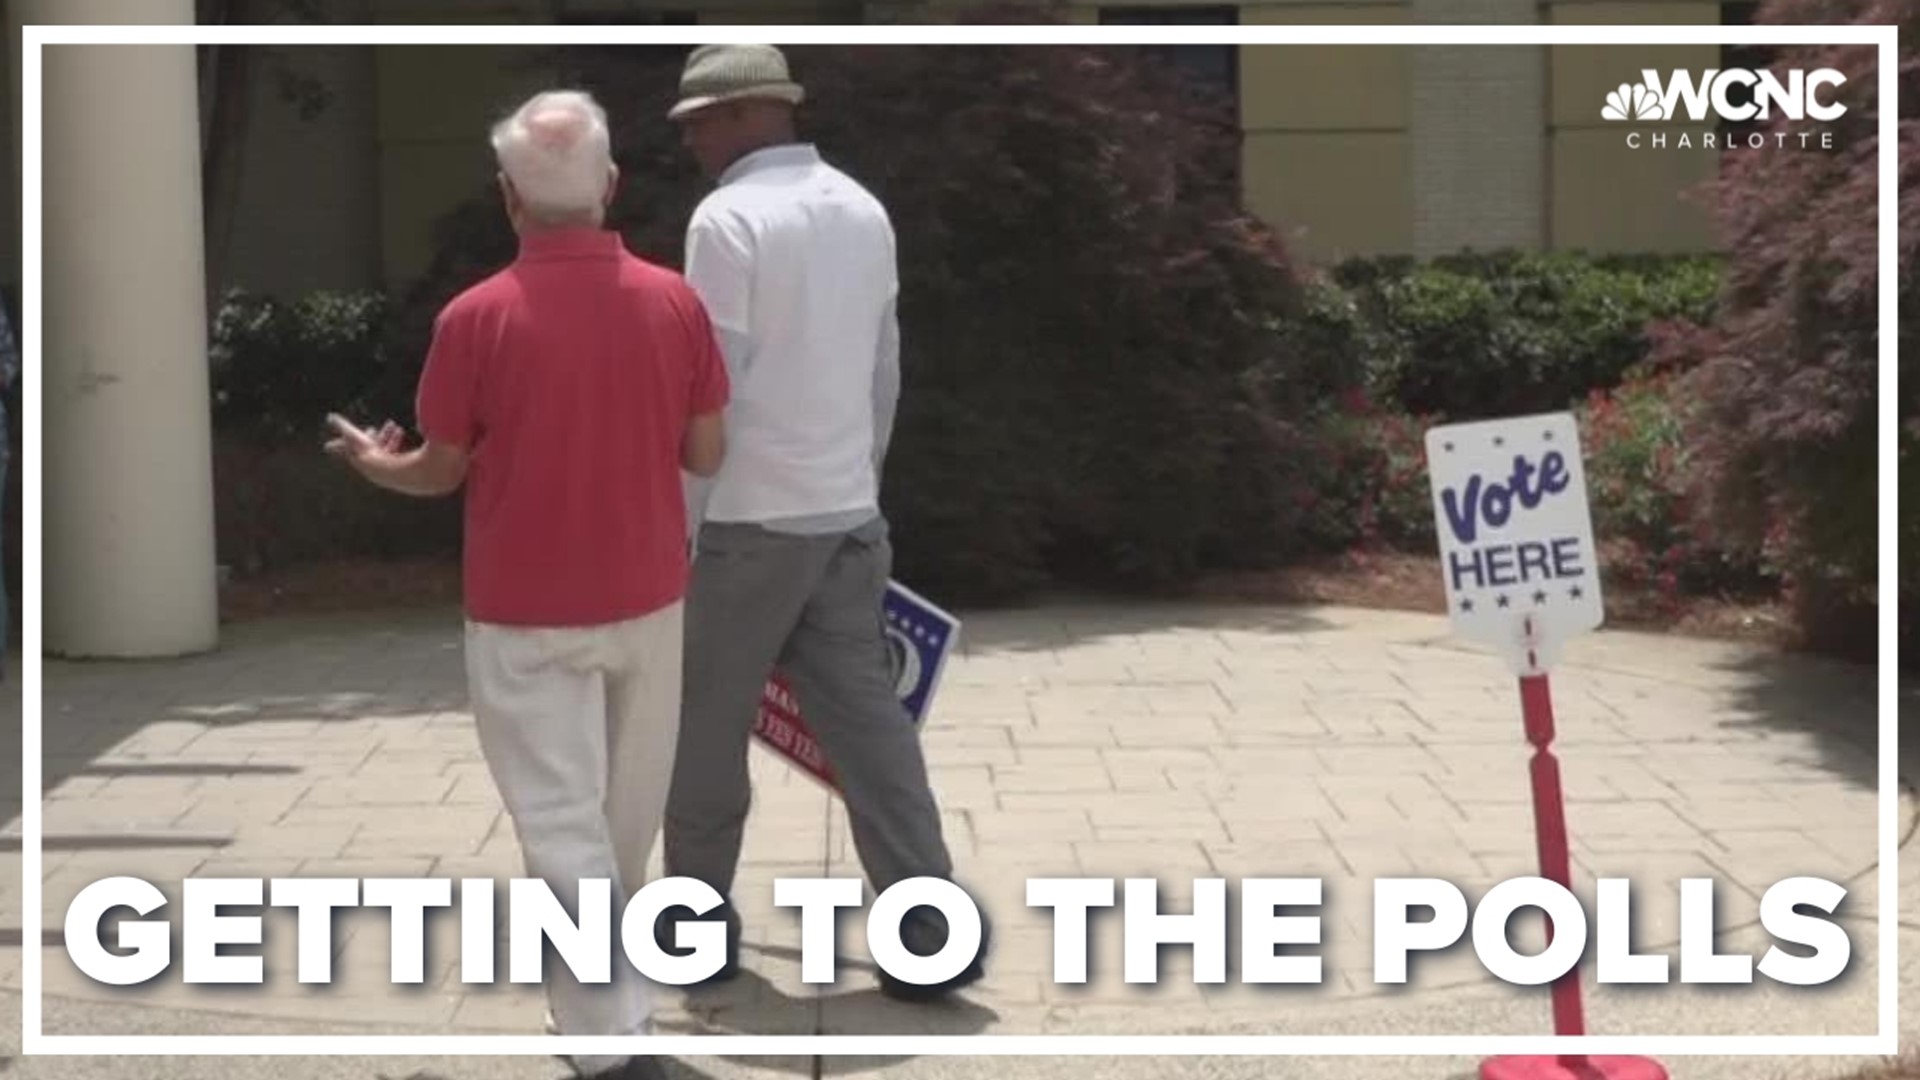 To help the elderly and those without transportation,  bus rides to early voting sites are helping in Charlotte.